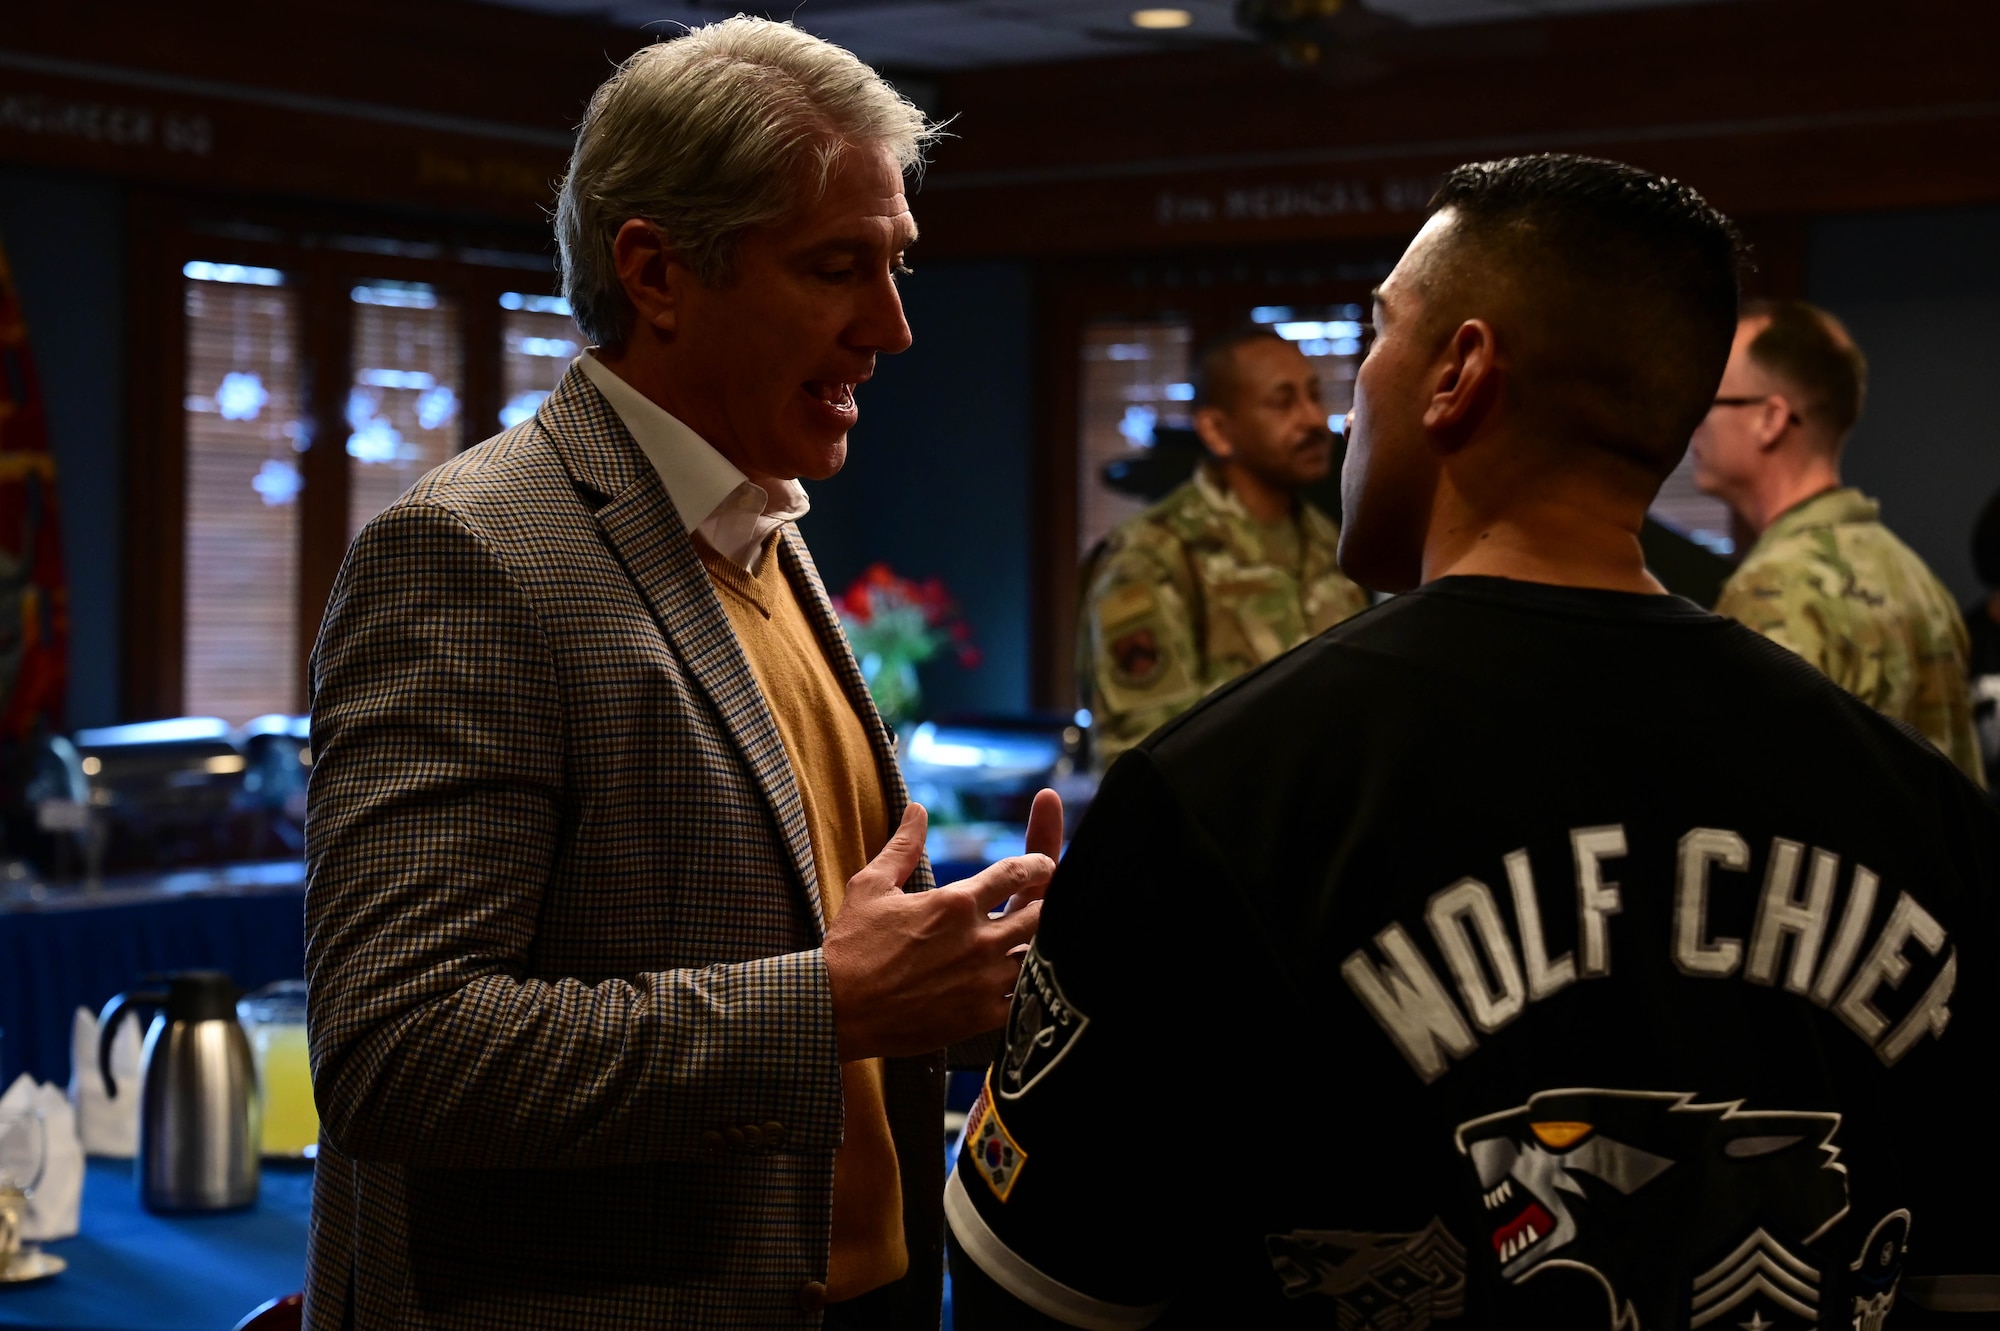 Retired Brig. Gen. Jeremy Sloane, ‘Wolf’ class of 2015-2016, speaks with Chief Master Sgt. Carlos “Wolf Chief” Damian, 8th Fighter Wing command chief, during the Wolf Pack Leadership Forum during the Wolf Leadership Forum, at Kunsan Air Base, Republic of Korea, Feb. 23, 2023. As part of the Wolf Leadership Forum, former leaders of Kunsan Air Base returned to visit and learn about how the Wolfpack currently operates. (U.S. Air Force photo by Senior Airman Shannon Braaten)